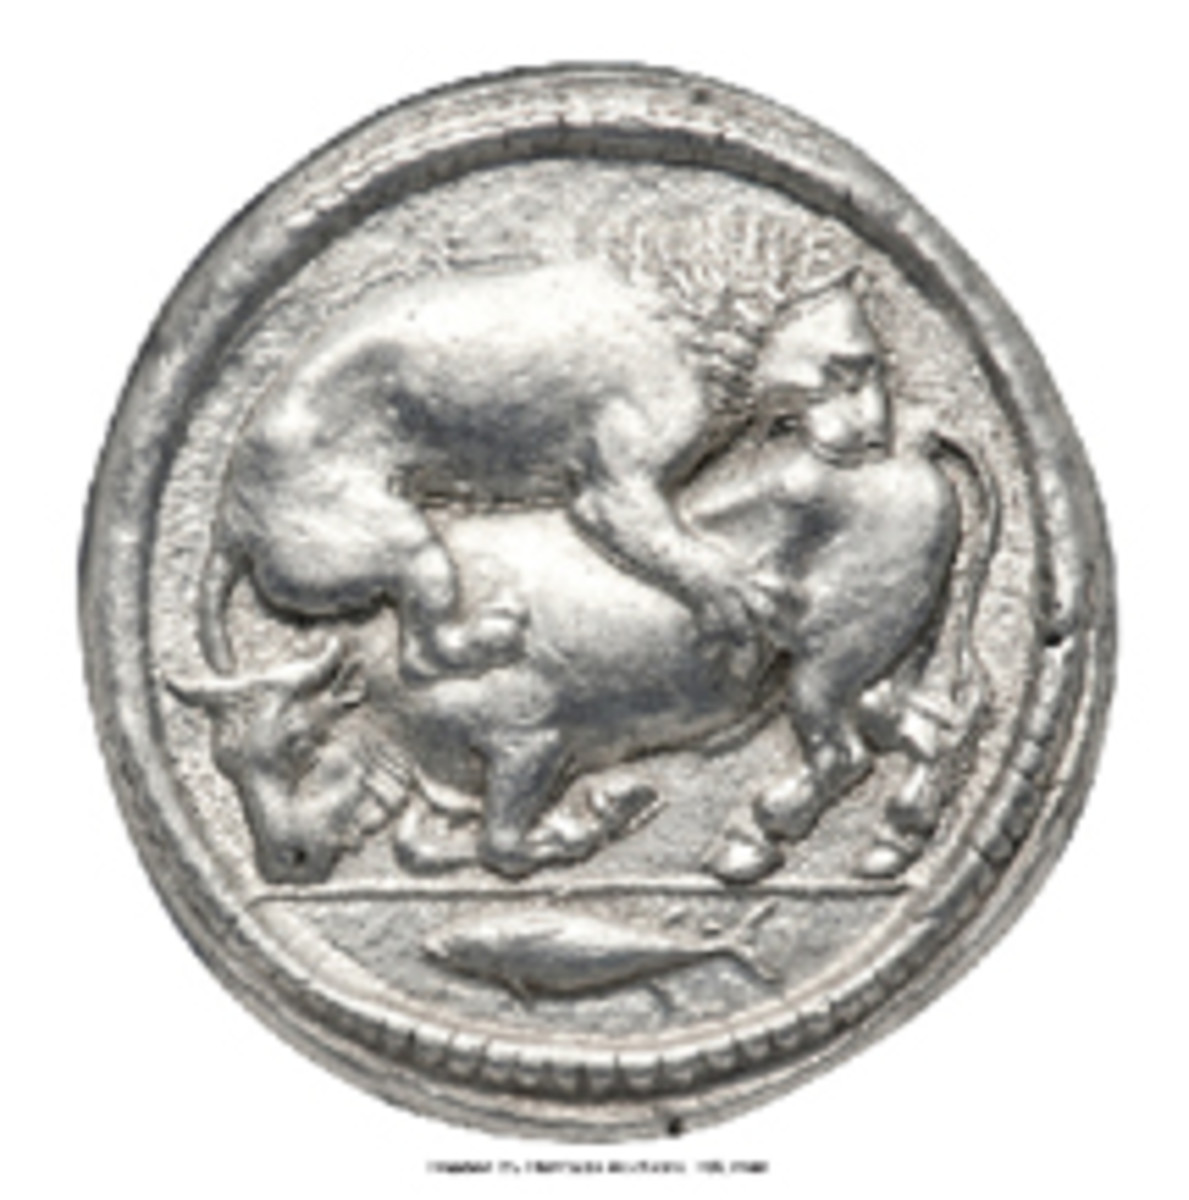  Top-selling ancient: choice Macedonian Acanthus silver tetradrachm that fetched $24,000 graded NGC Choice AU 5/5 - 4/5, Fine Style. (Image courtesy www.ha.com)